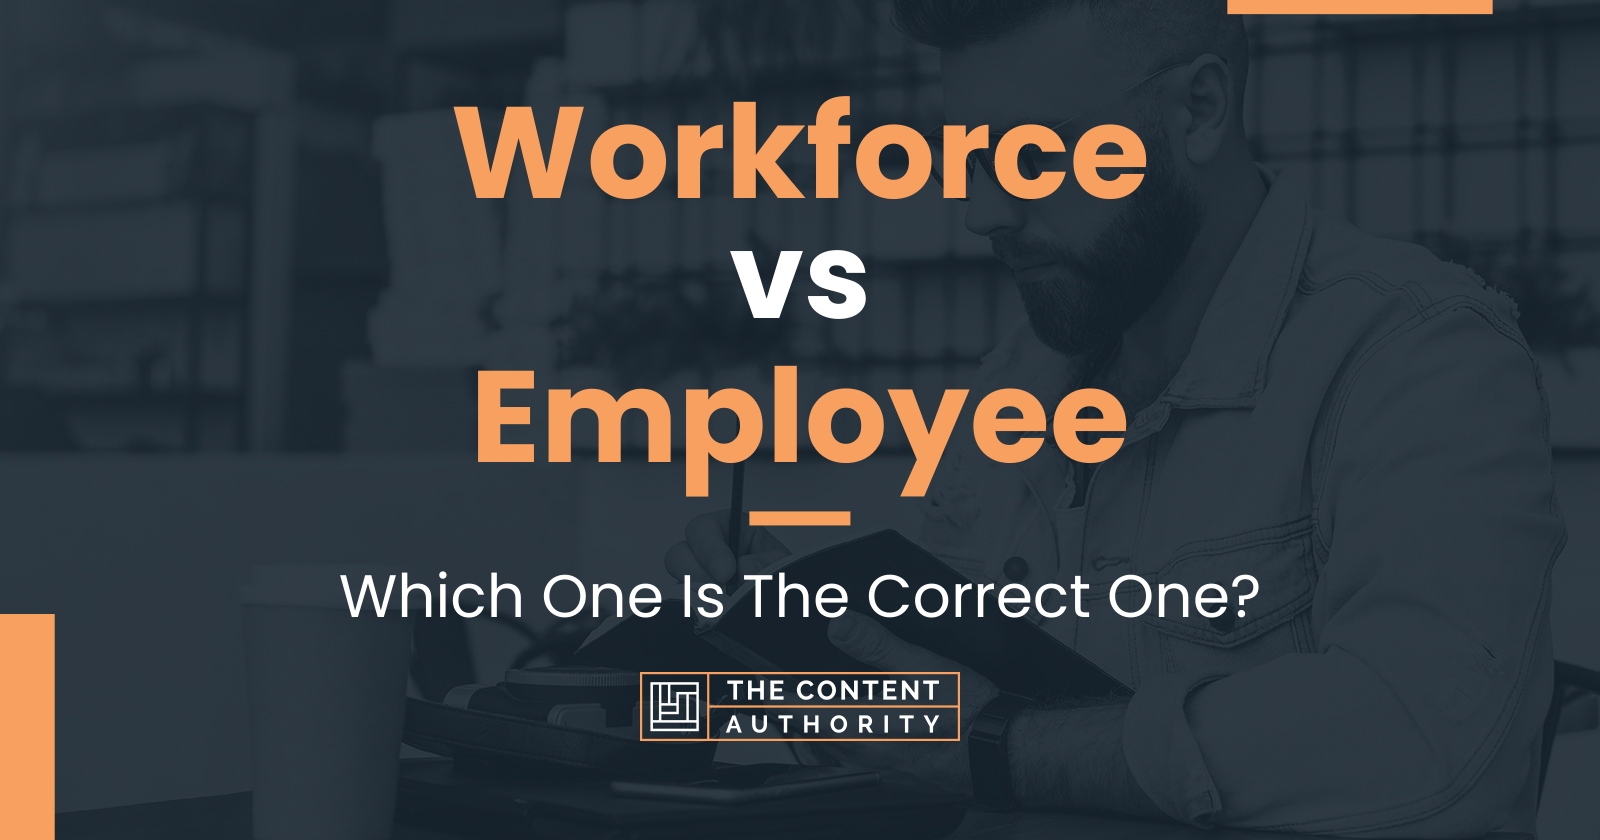 Workforce vs Employee: Which One Is The Correct One?